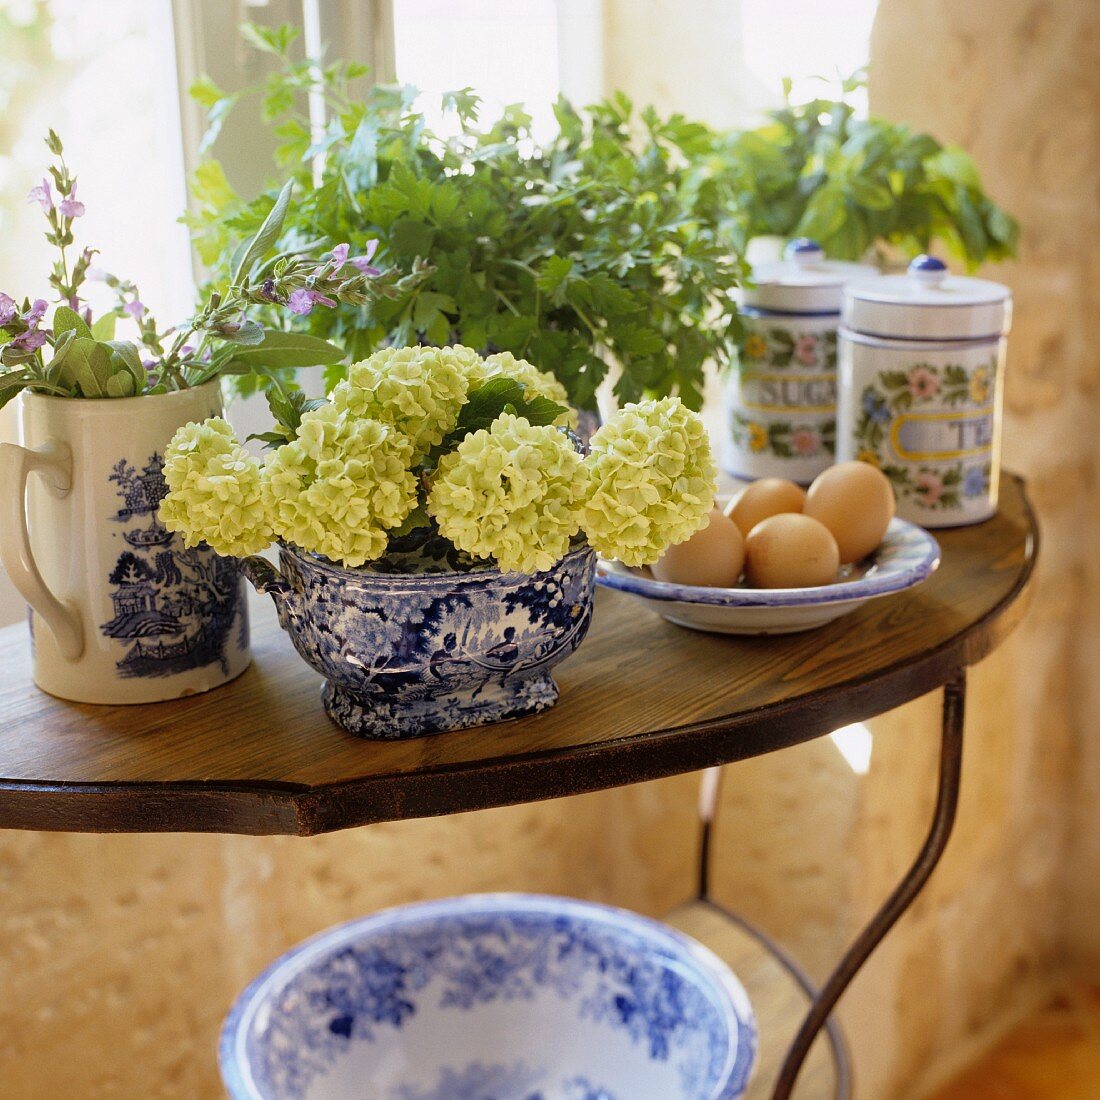 Bunches of herbs and flowers in porcelain jars on a side table